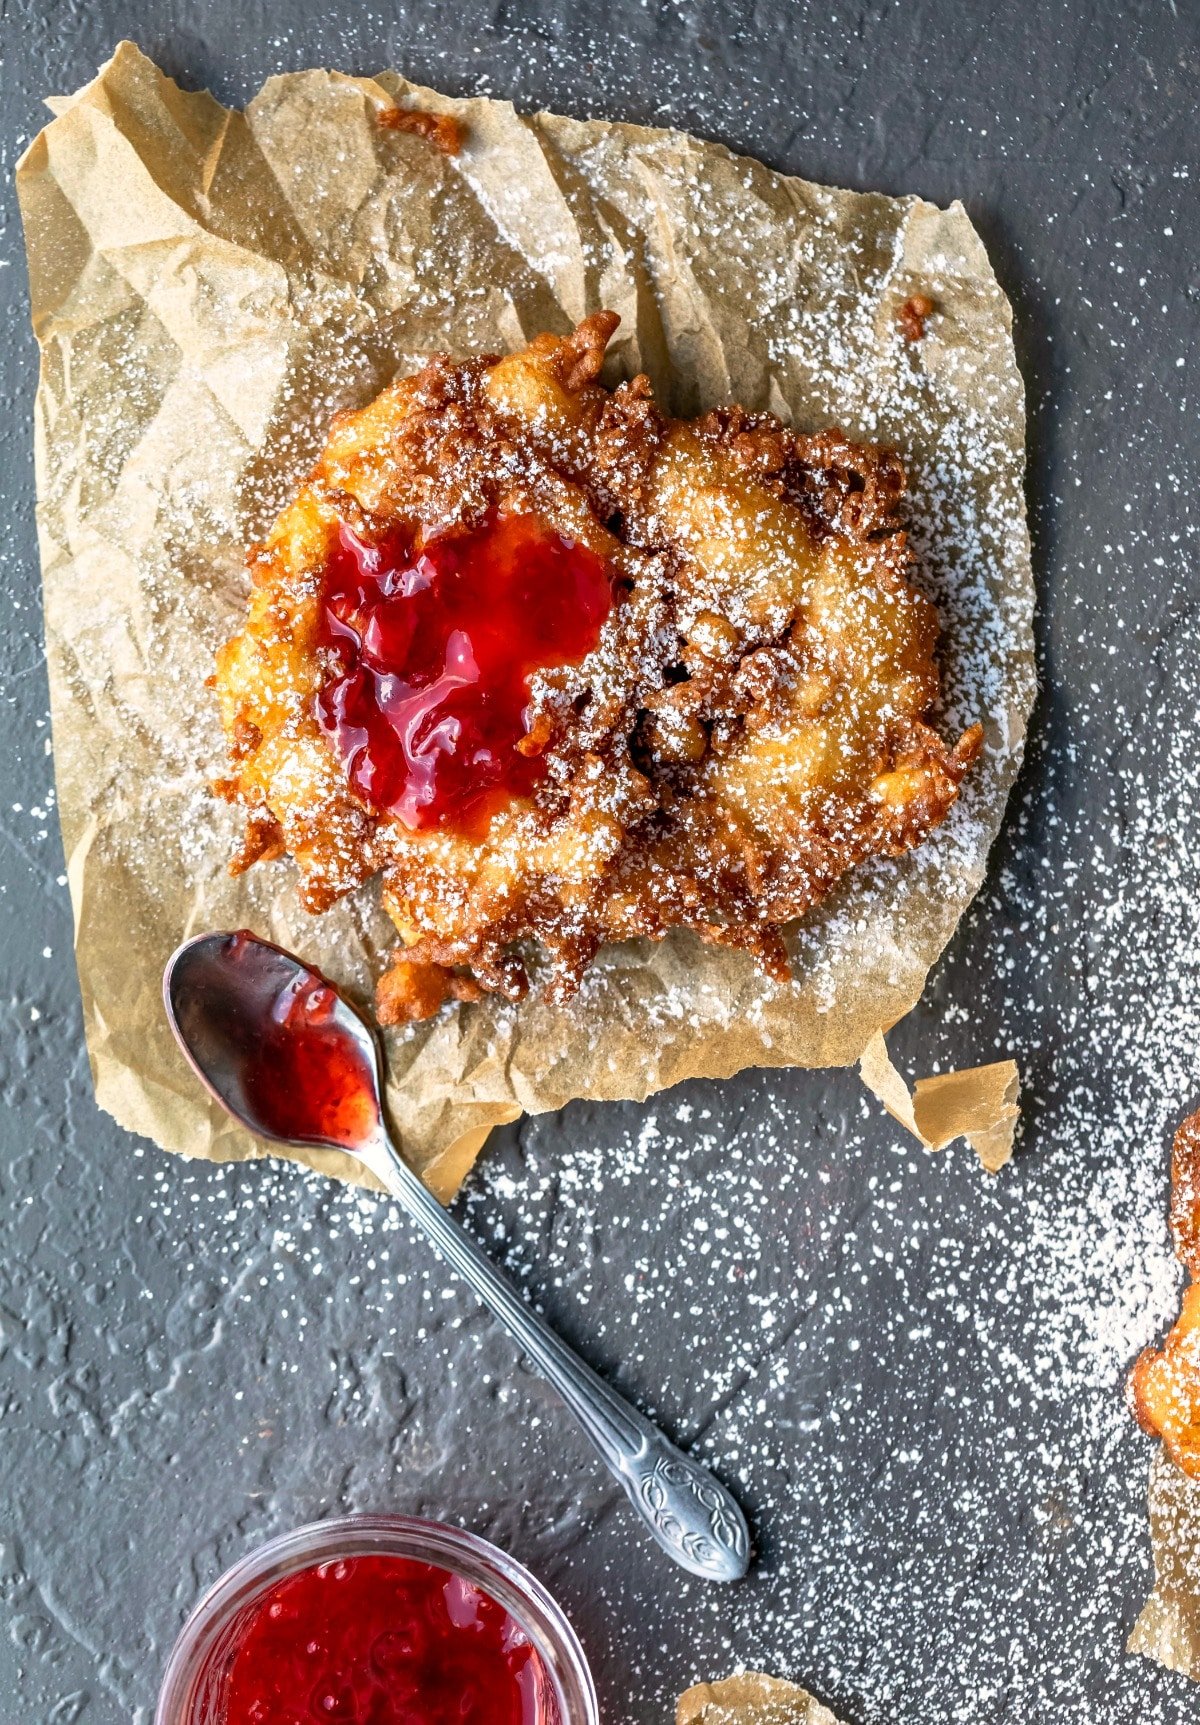 Homemade funnel cake topped with strawberry jam.